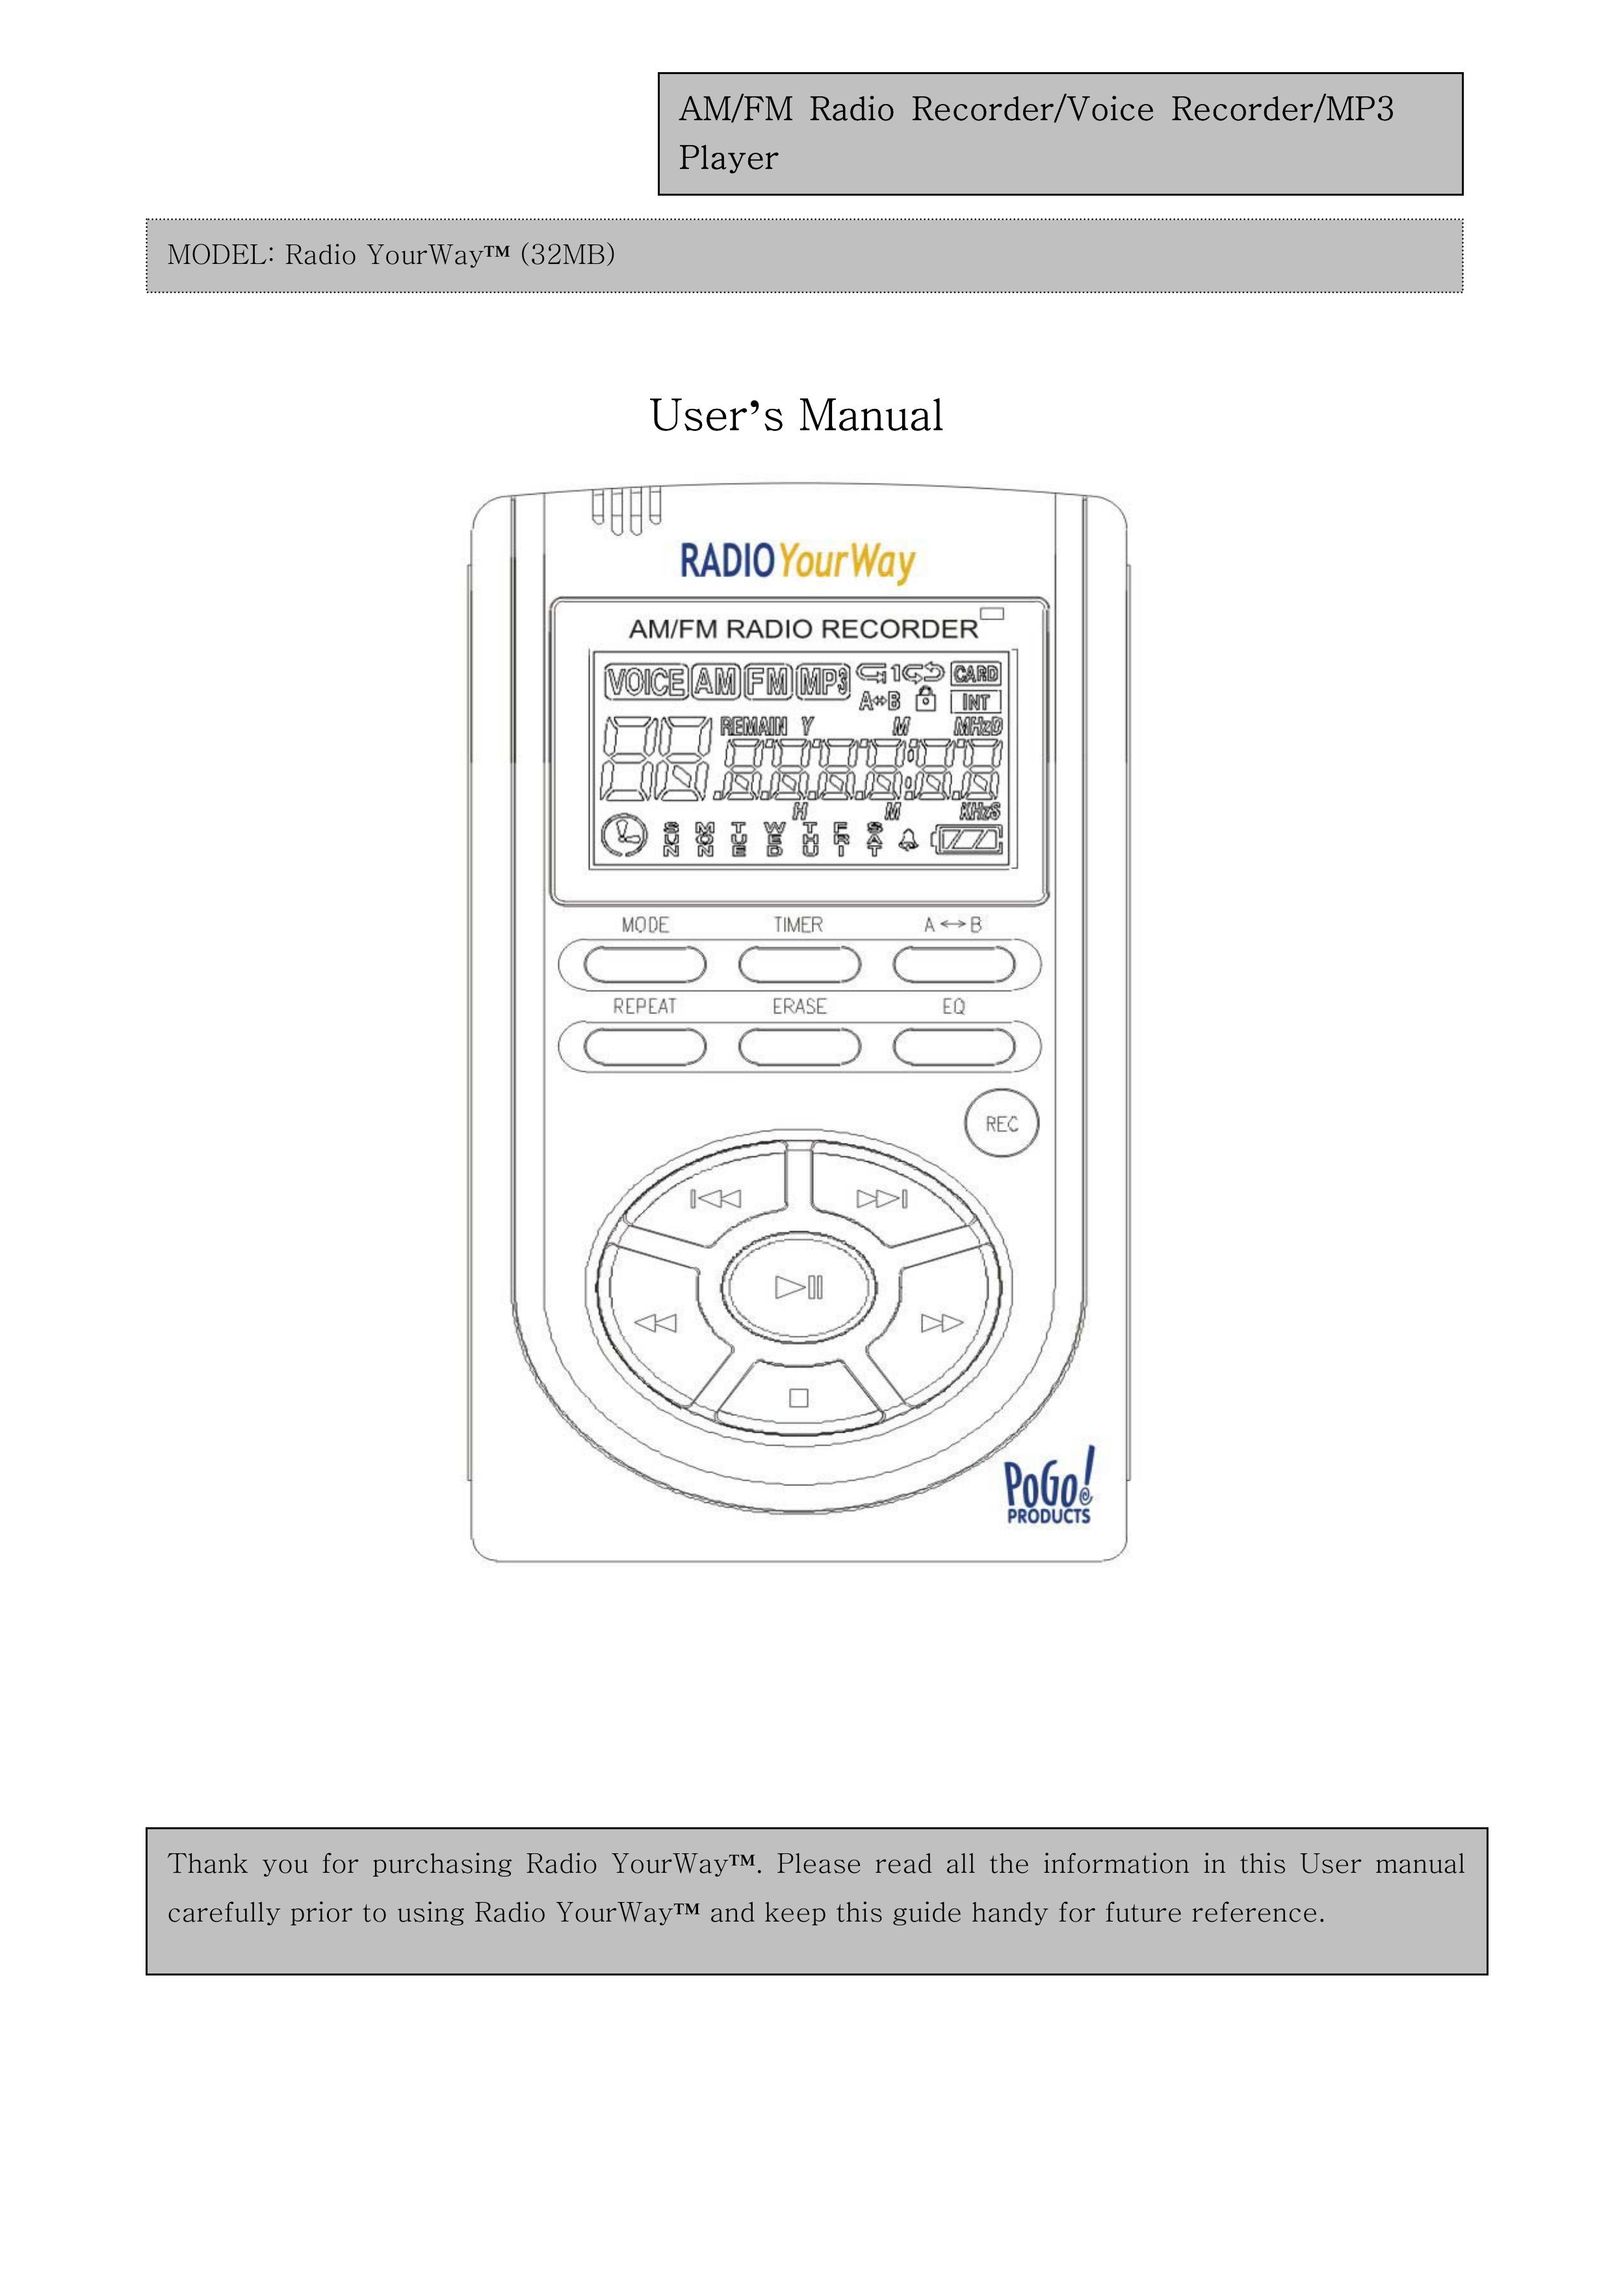 PoGo Products Radio YourWay MP3 Player User Manual